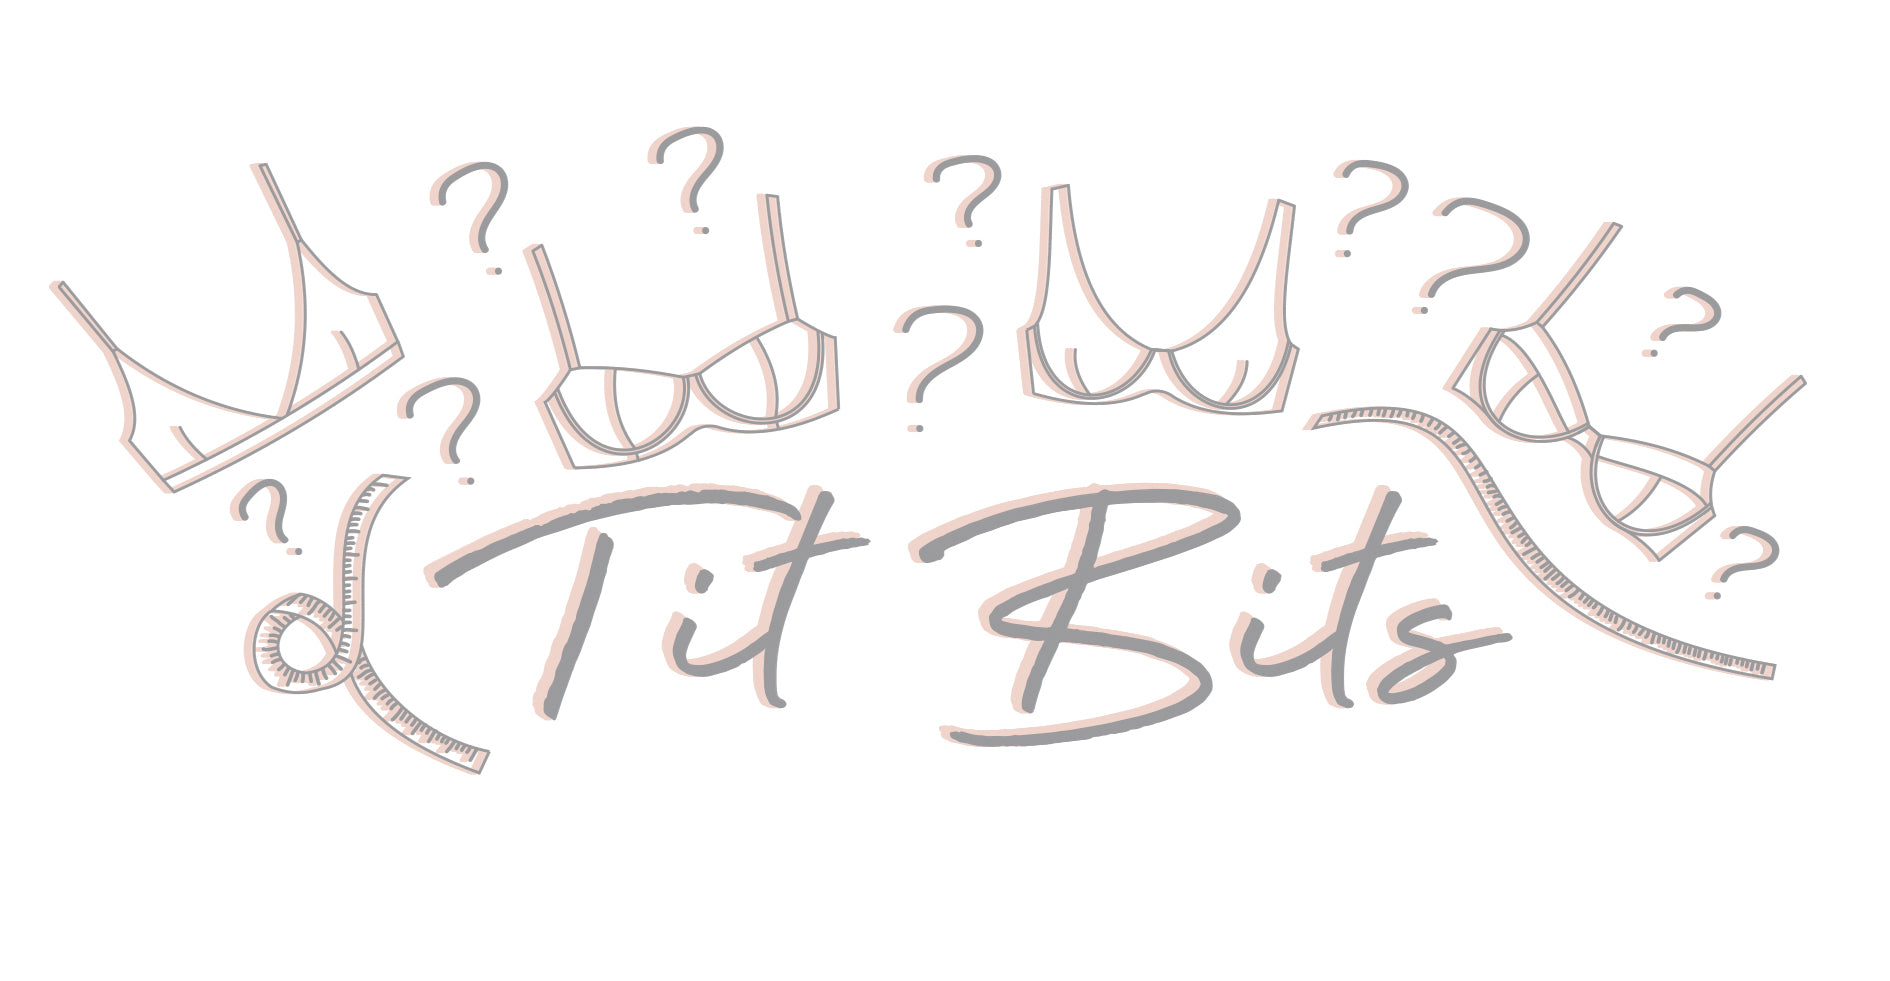 Tit Bits: How to tell if your bra fits! – The Pantry Underwear